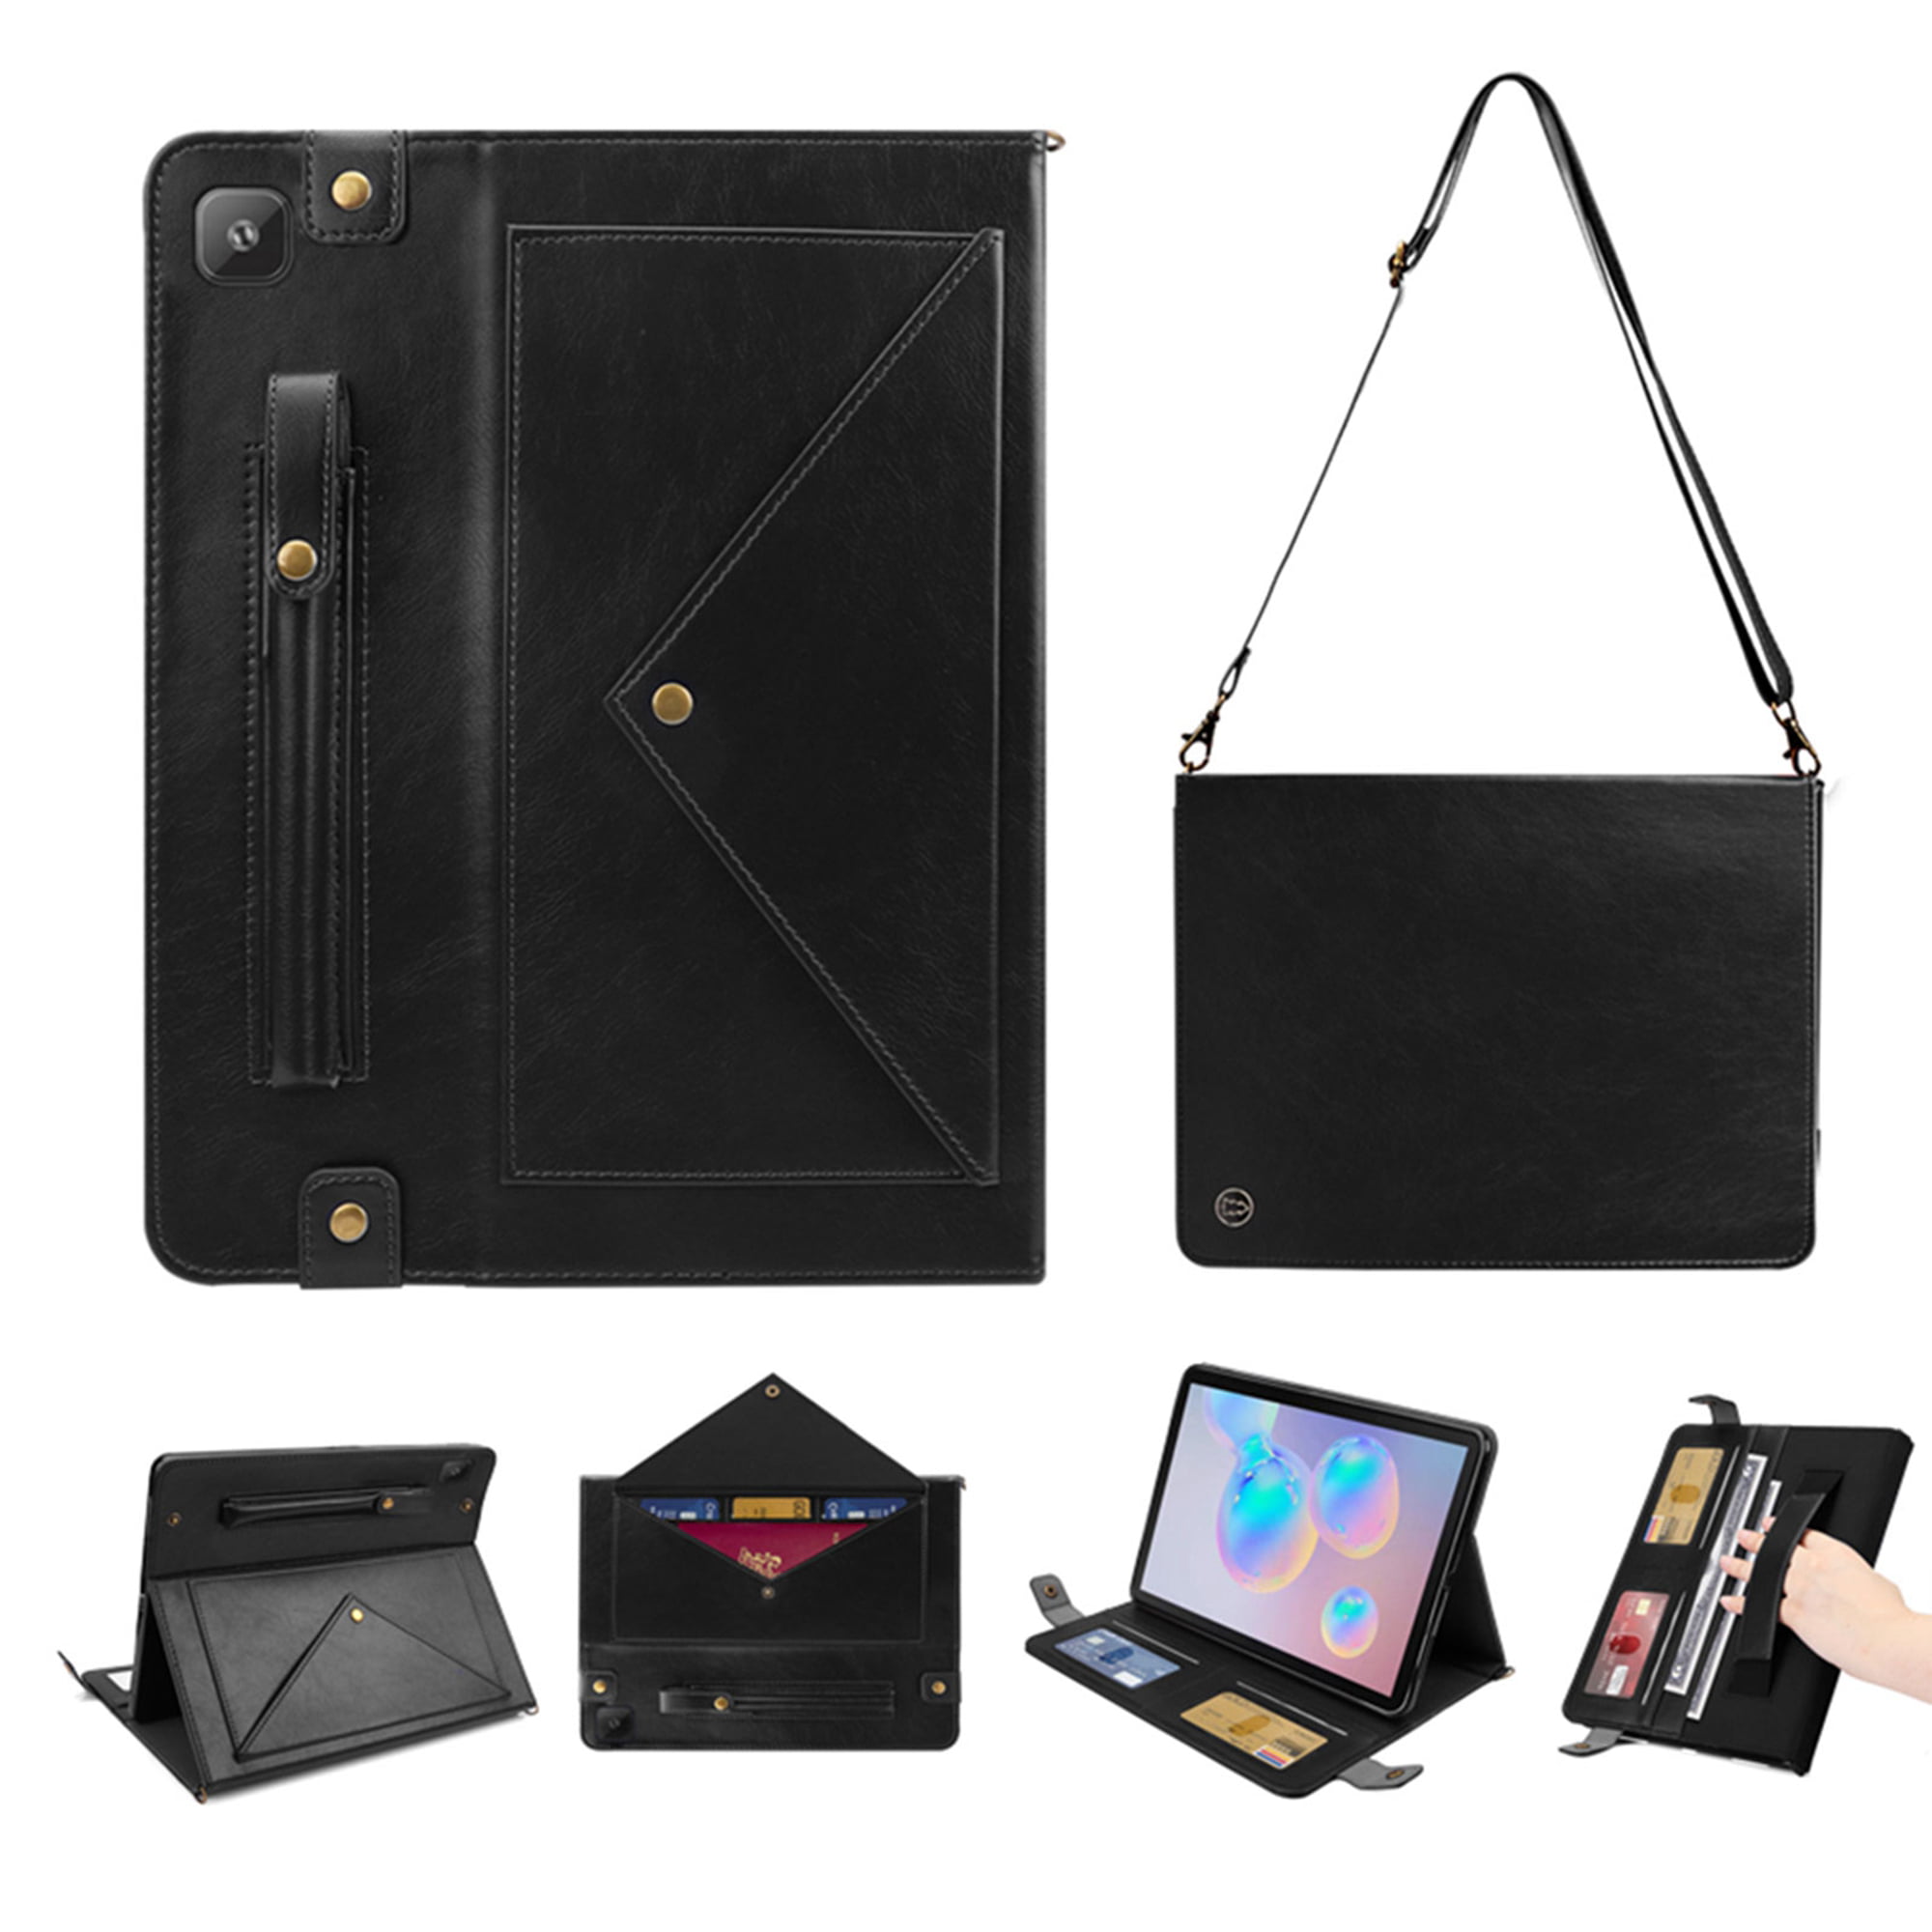 Black for 10.1" Tablet IL/SP5-6010-EF-BP... Samsung Carrying Case Book Fold 